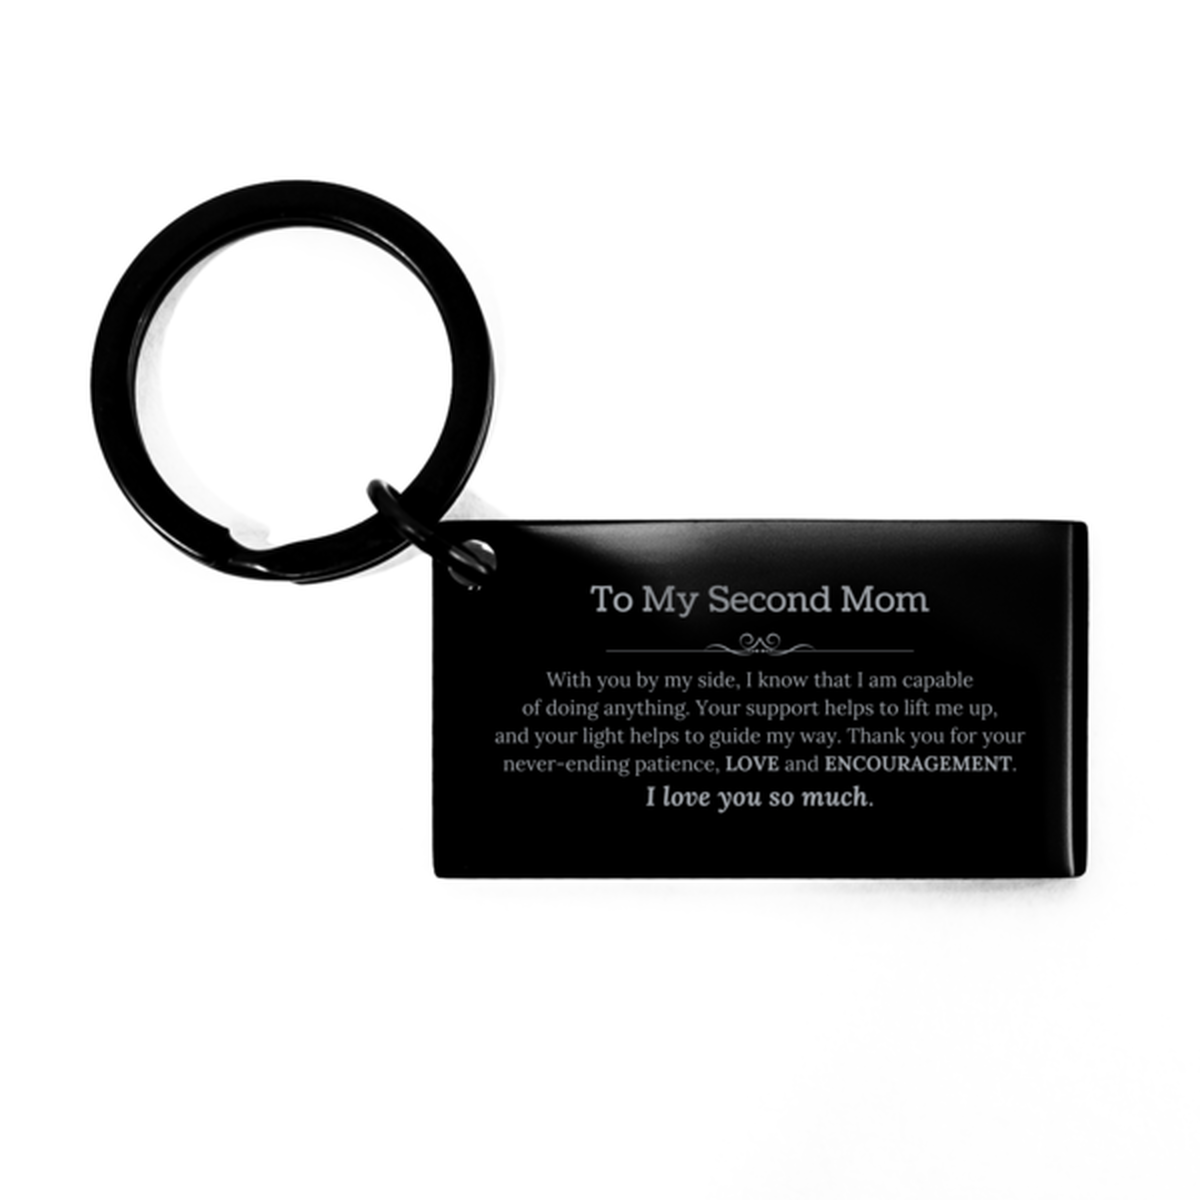 Appreciation Second Mom Keychain Gifts, To My Second Mom Birthday Christmas Wedding Keepsake Gifts for Second Mom With you by my side, I know that I am capable of doing anything. I love you so much